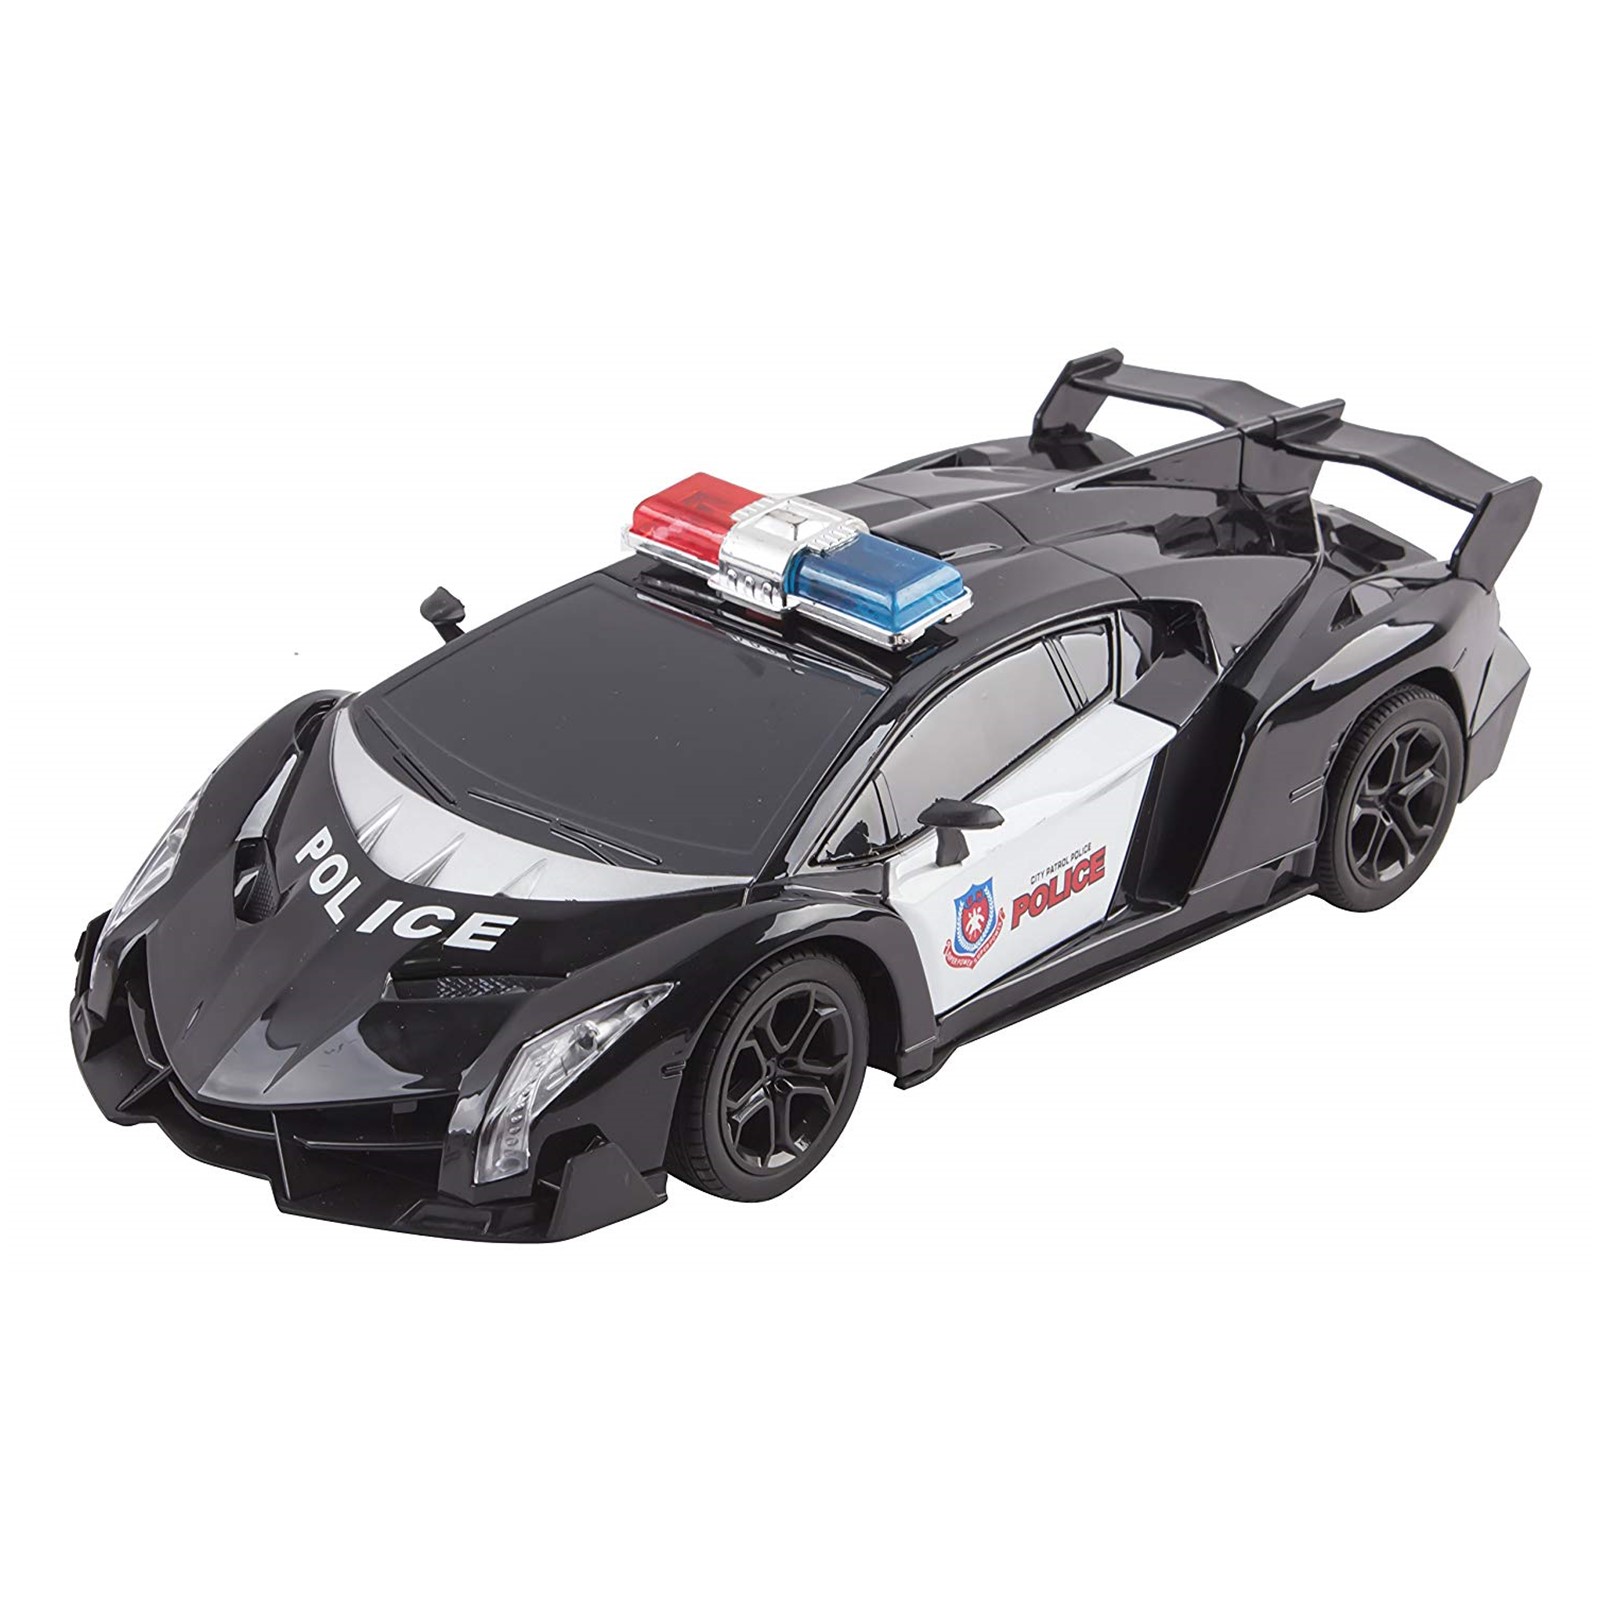 Police RC Car Super Exotic Large 116 Scale Size Kids Remote Control Easy To Operate Toy Sports Cars With Functional LED Headlights Perfect Cop Race Vehicle Full Function Black RD808A-1